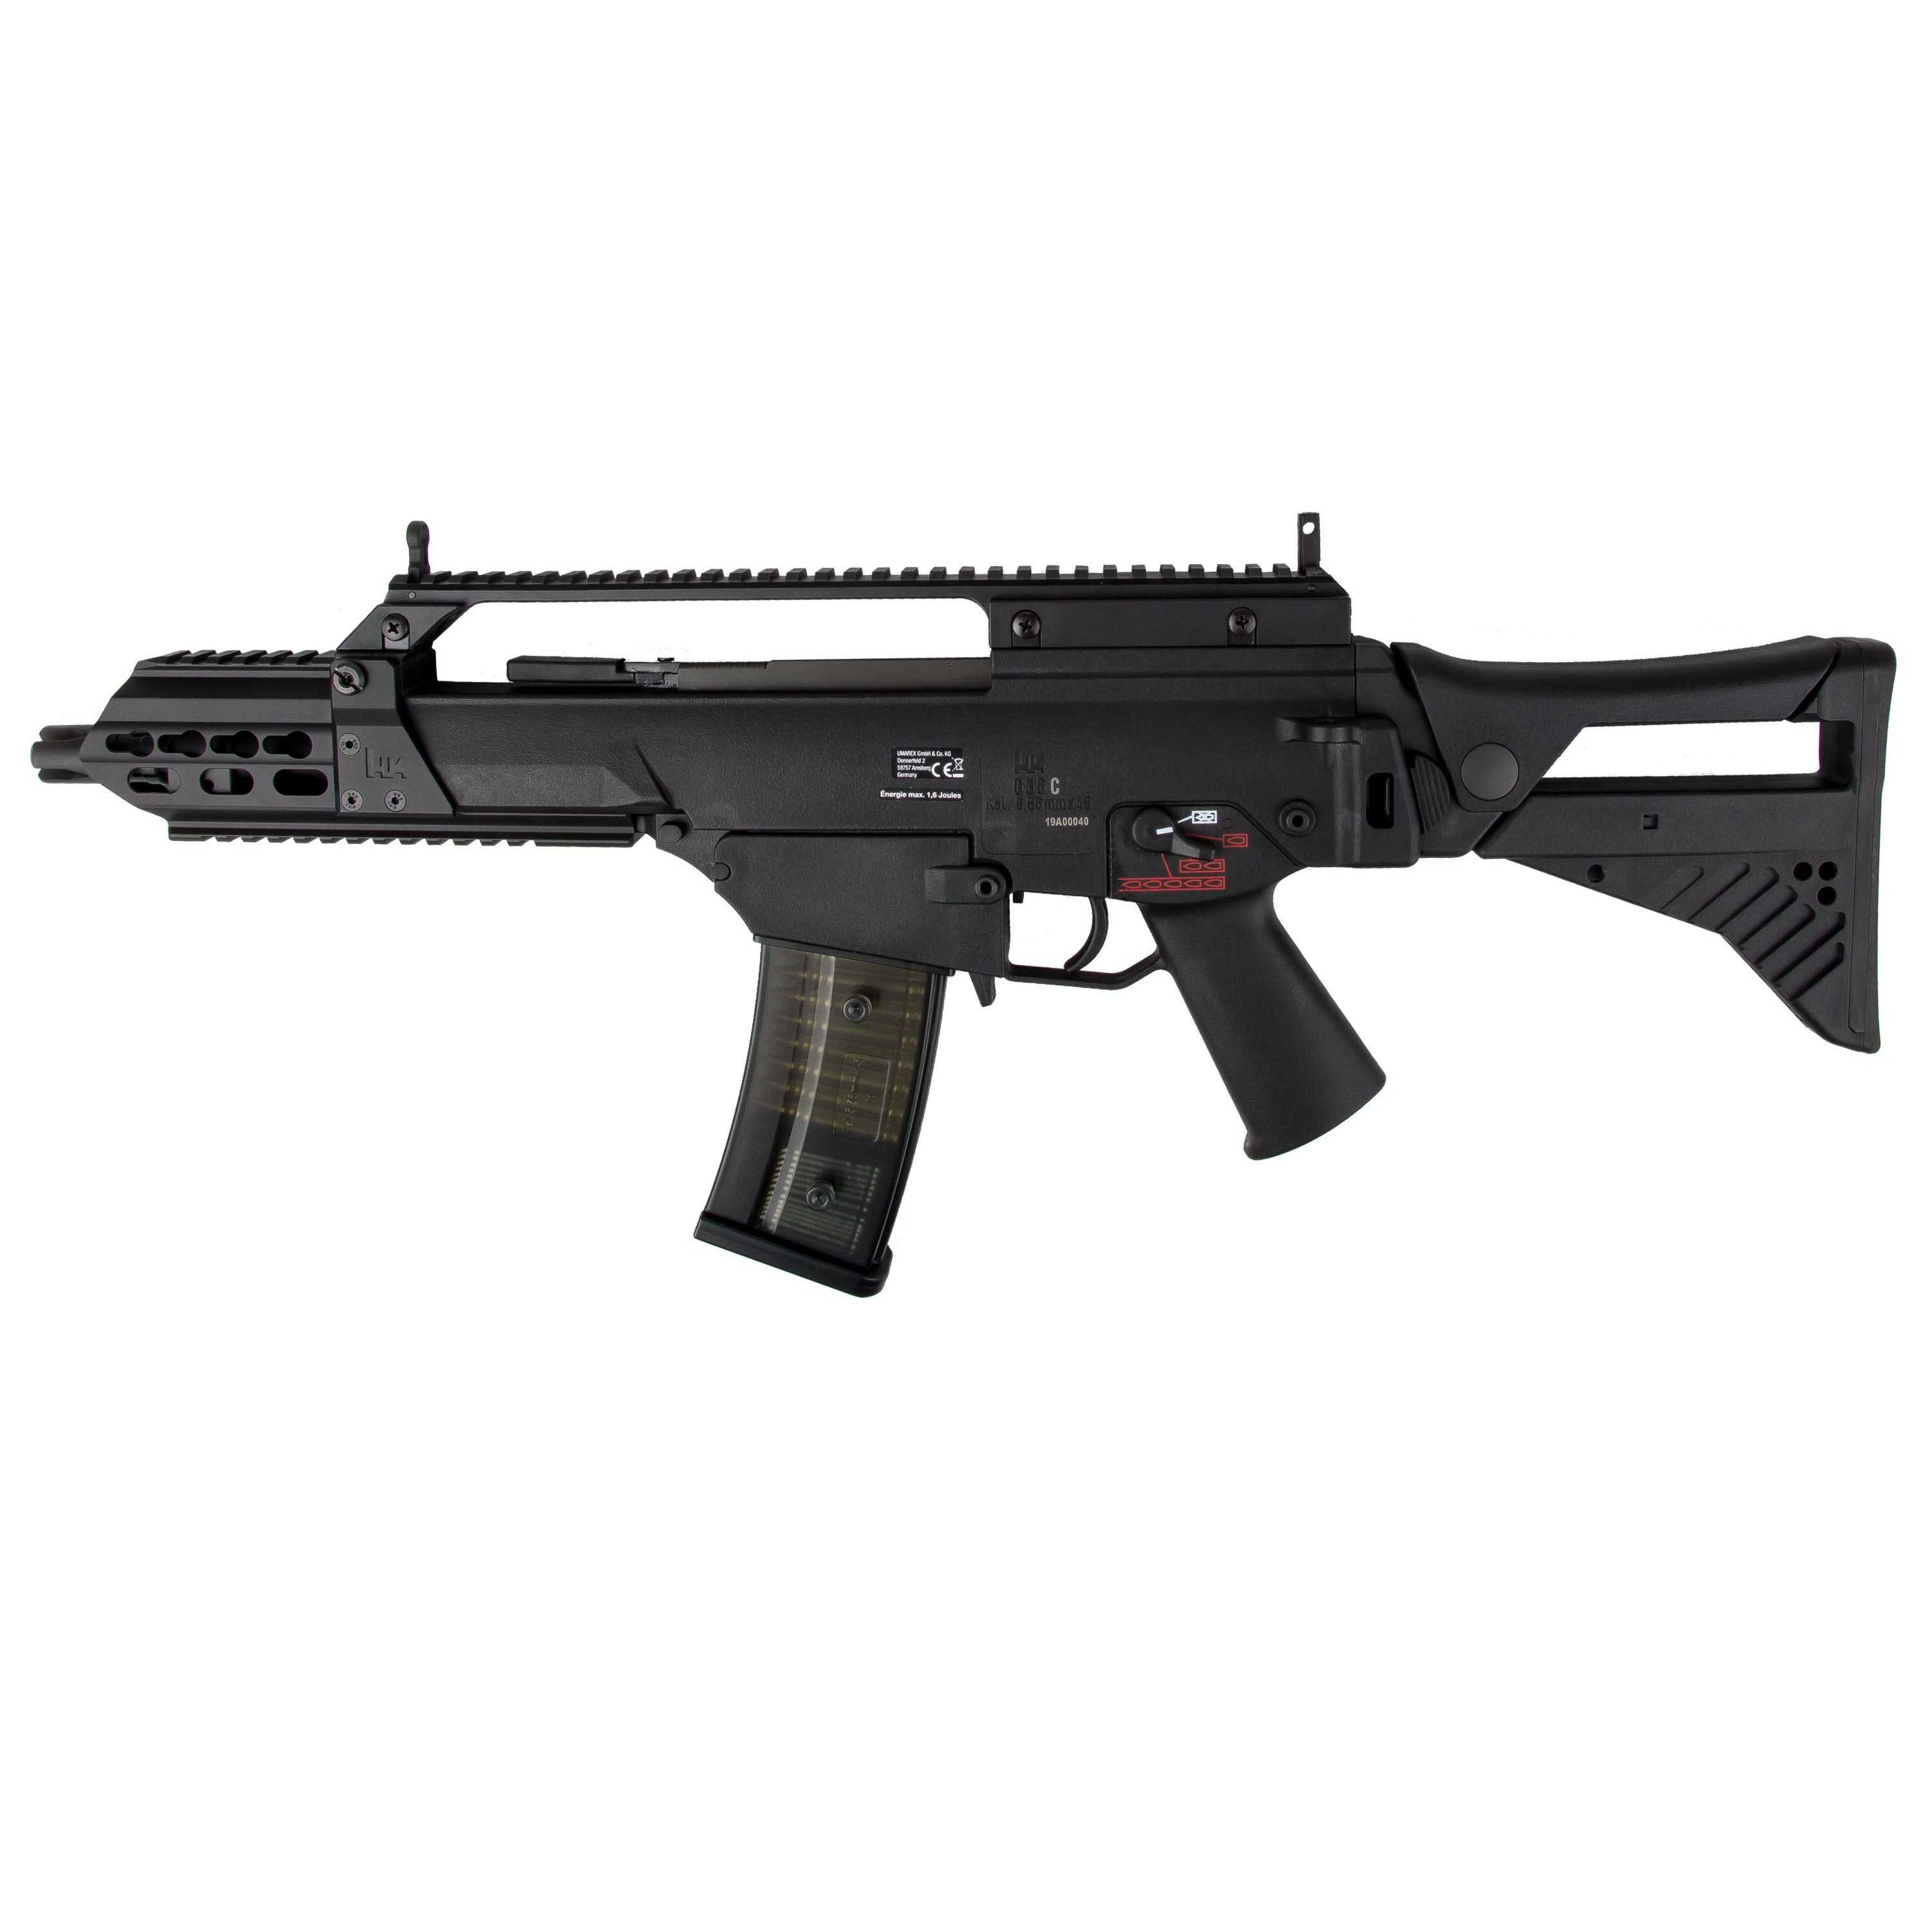 Purchase the Heckler & Koch Airsoft Assault Rifle G36 1.5 J S-AE